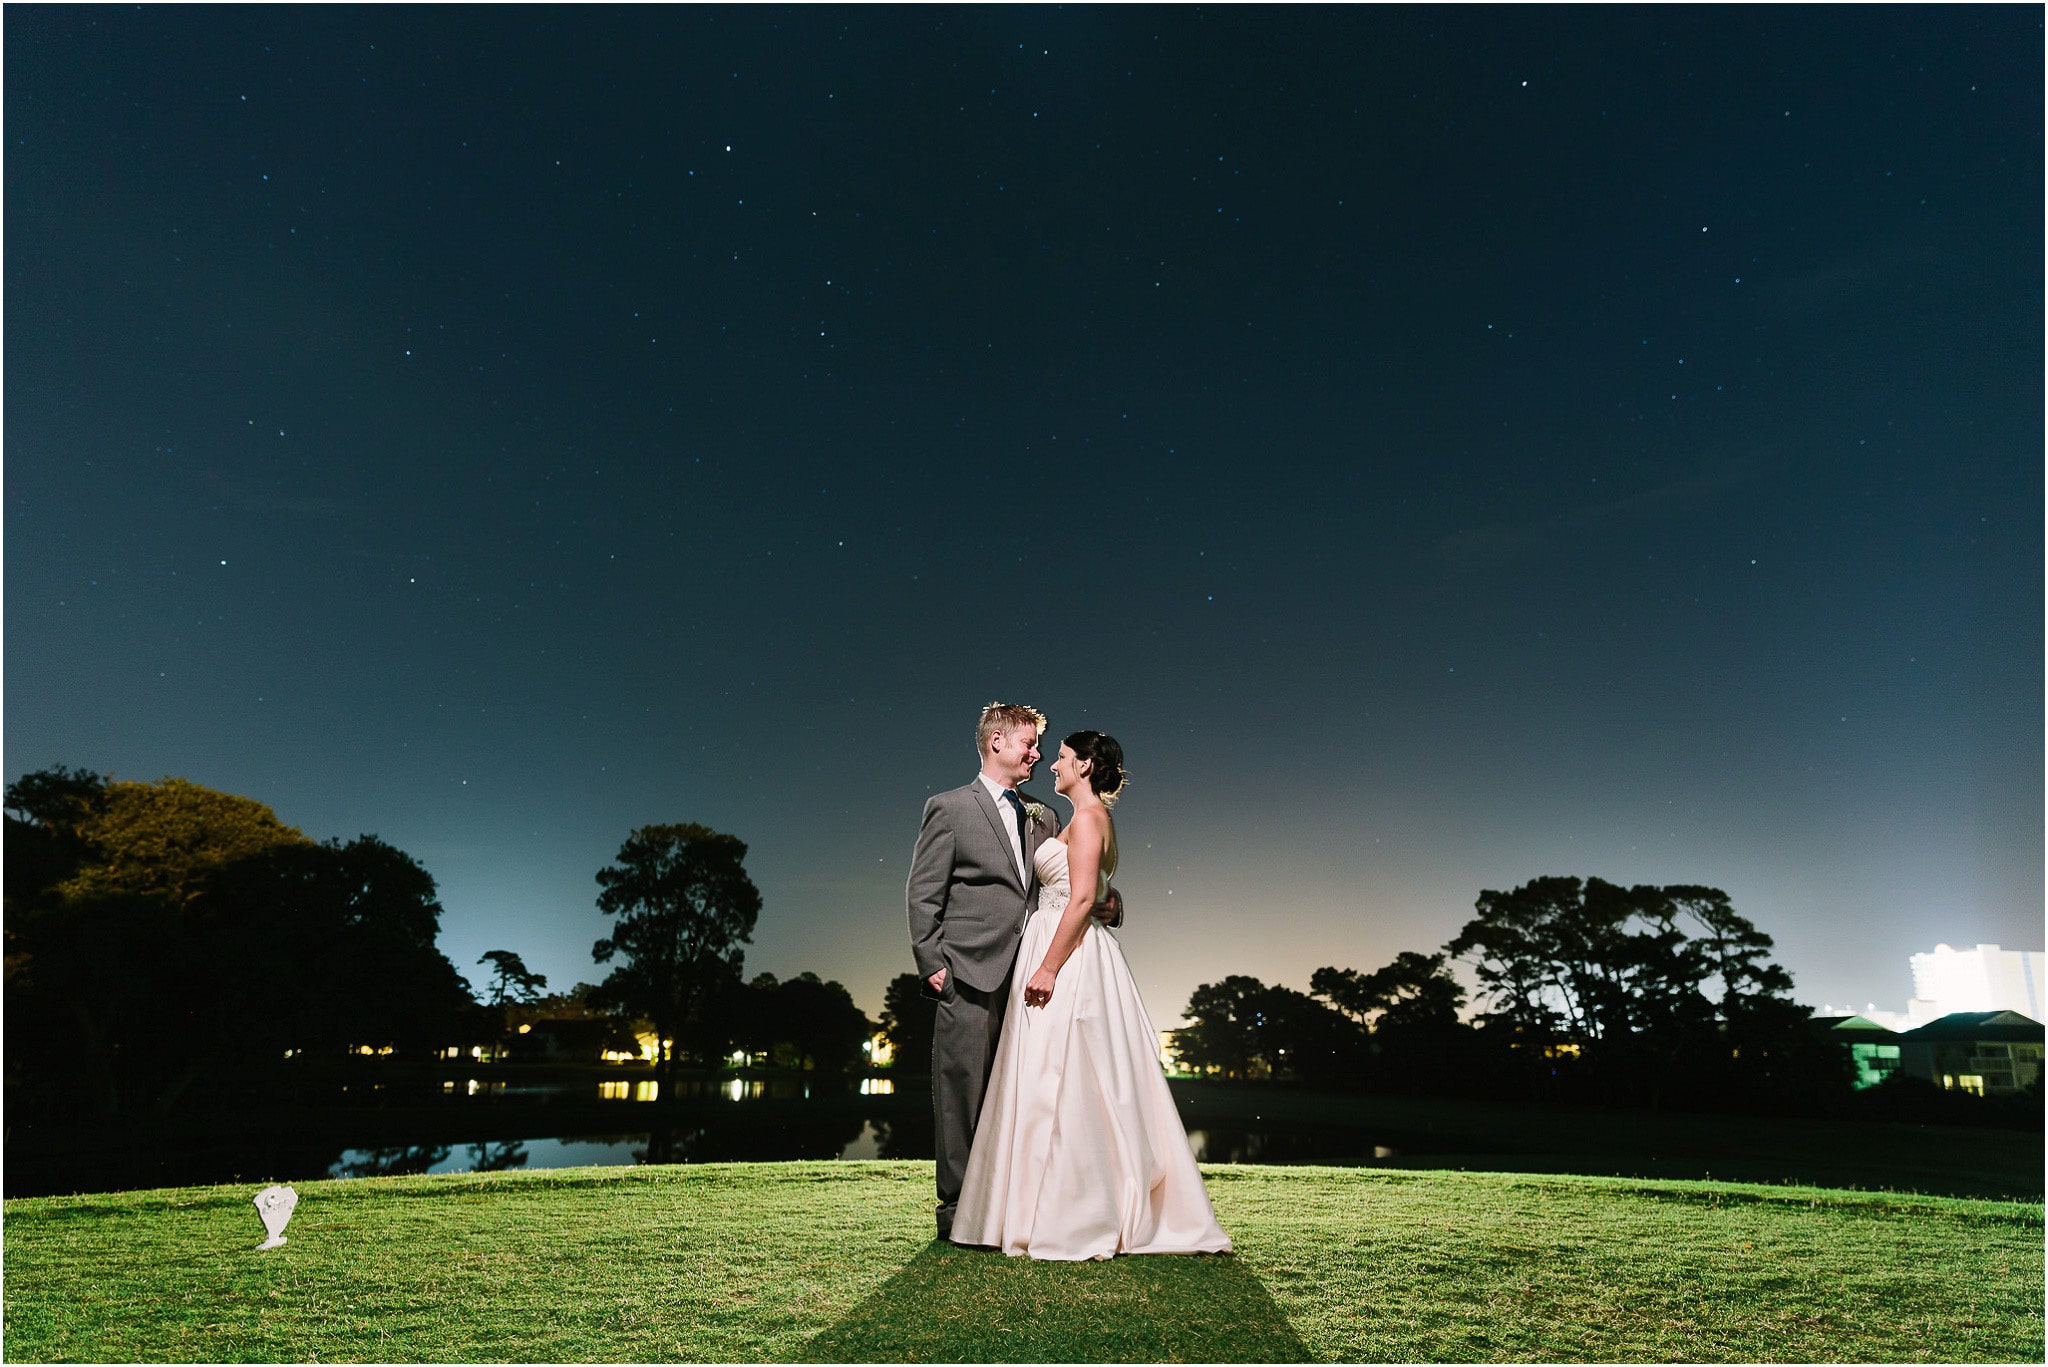 The couple standing under what will soon be a gorgeous starry night sky - Myrtle Beach wedding of Meg and Matt at the Golf Beach and Surf club-38